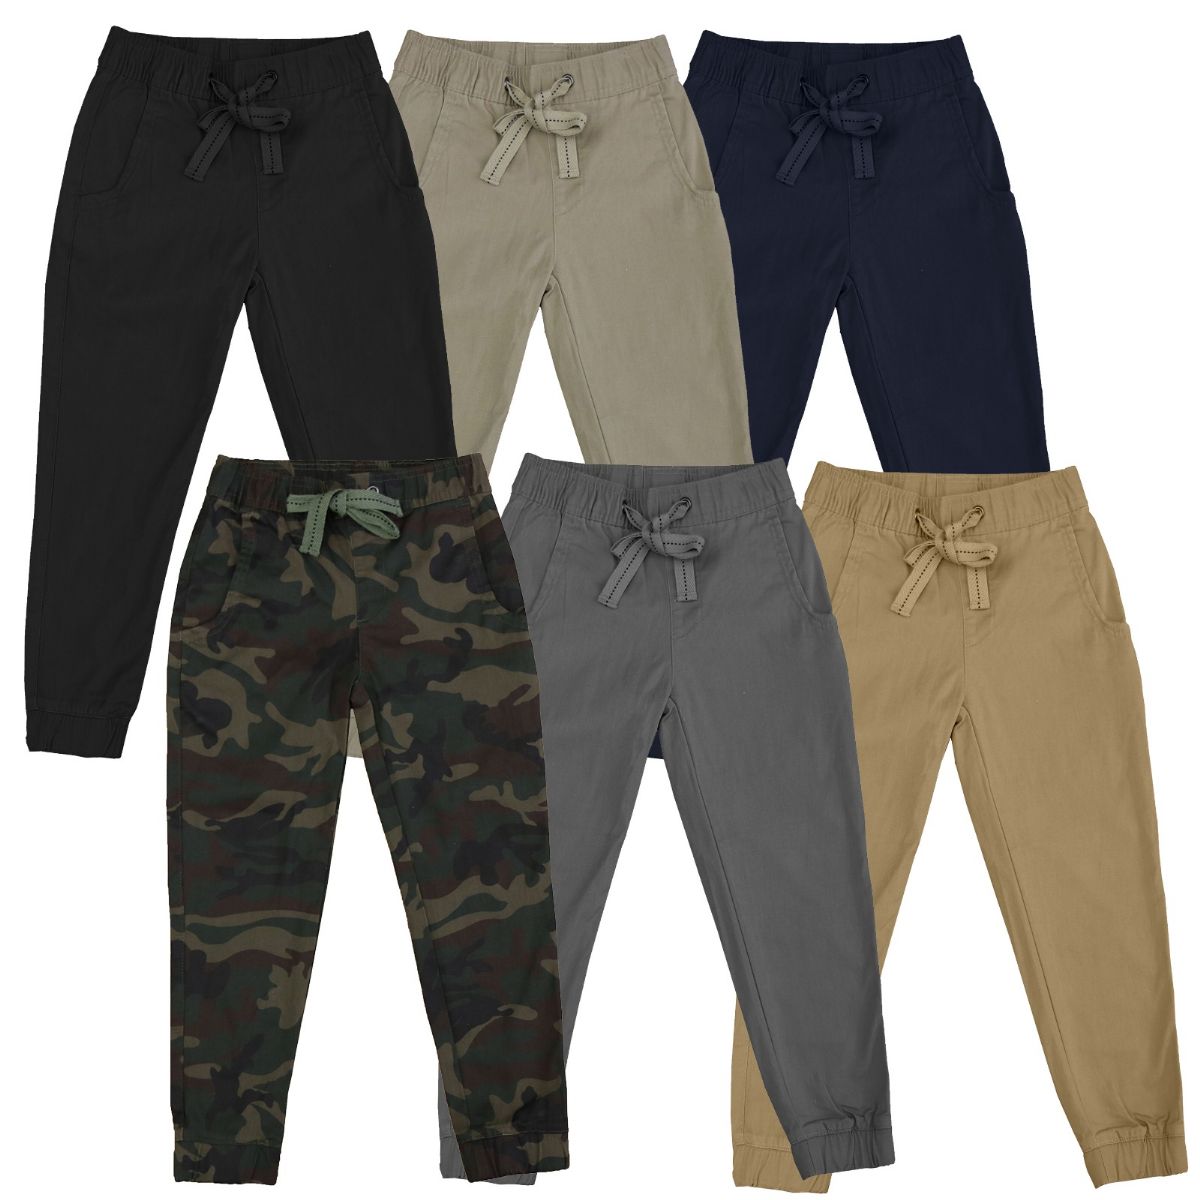 24 Pieces of Youth Boy Jogger Pants In Assorted Colors And Sizes